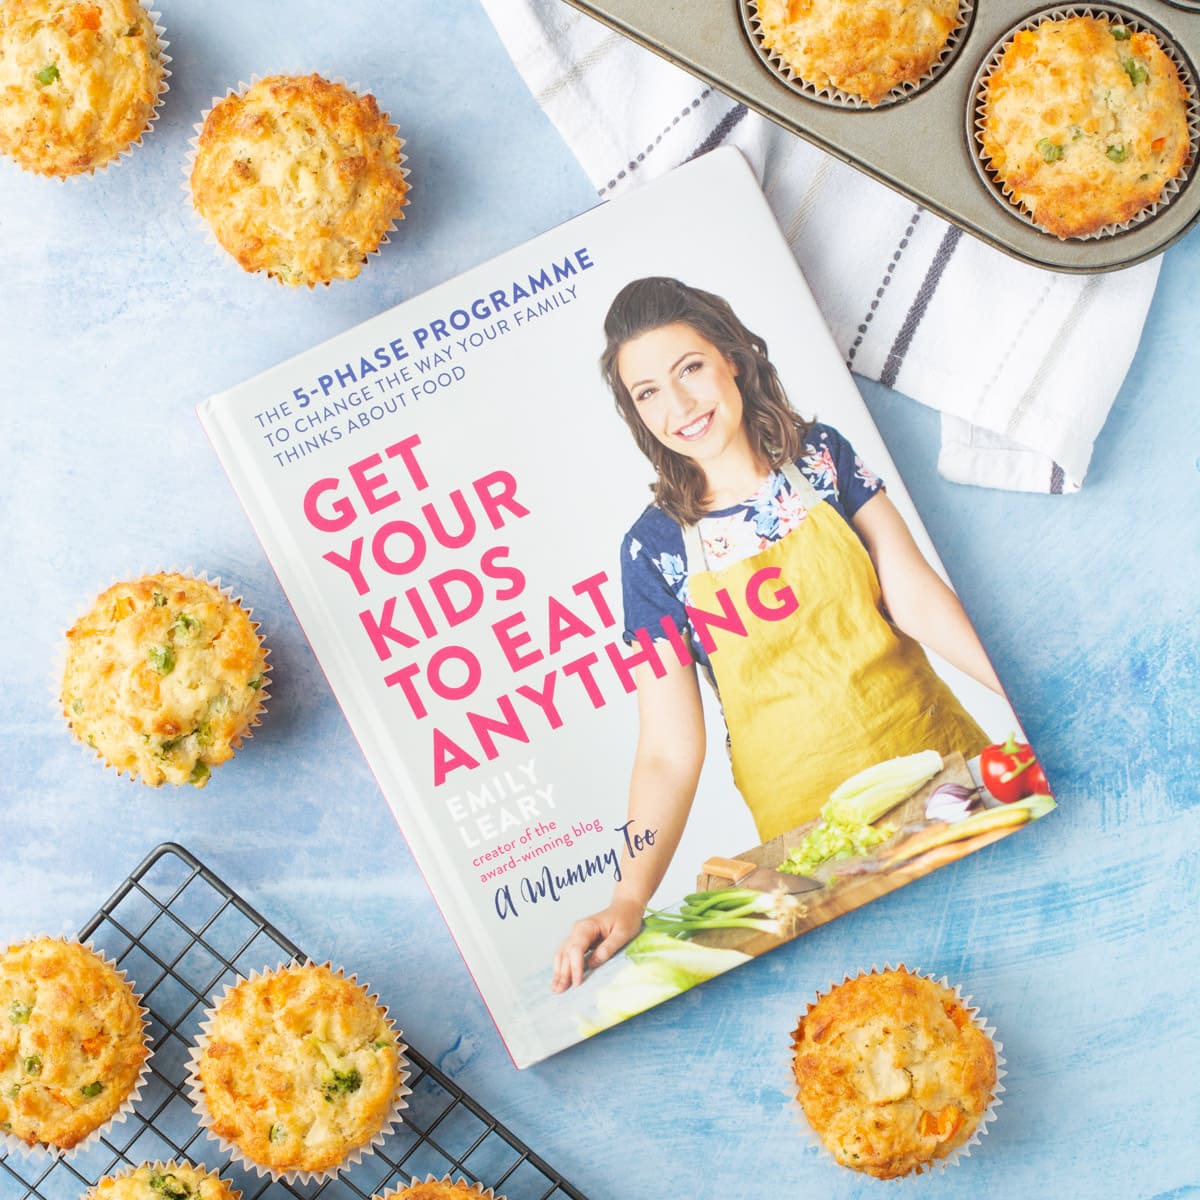 Get Your Kids To Eat Anything cookbook surrounded by savoury muffins.